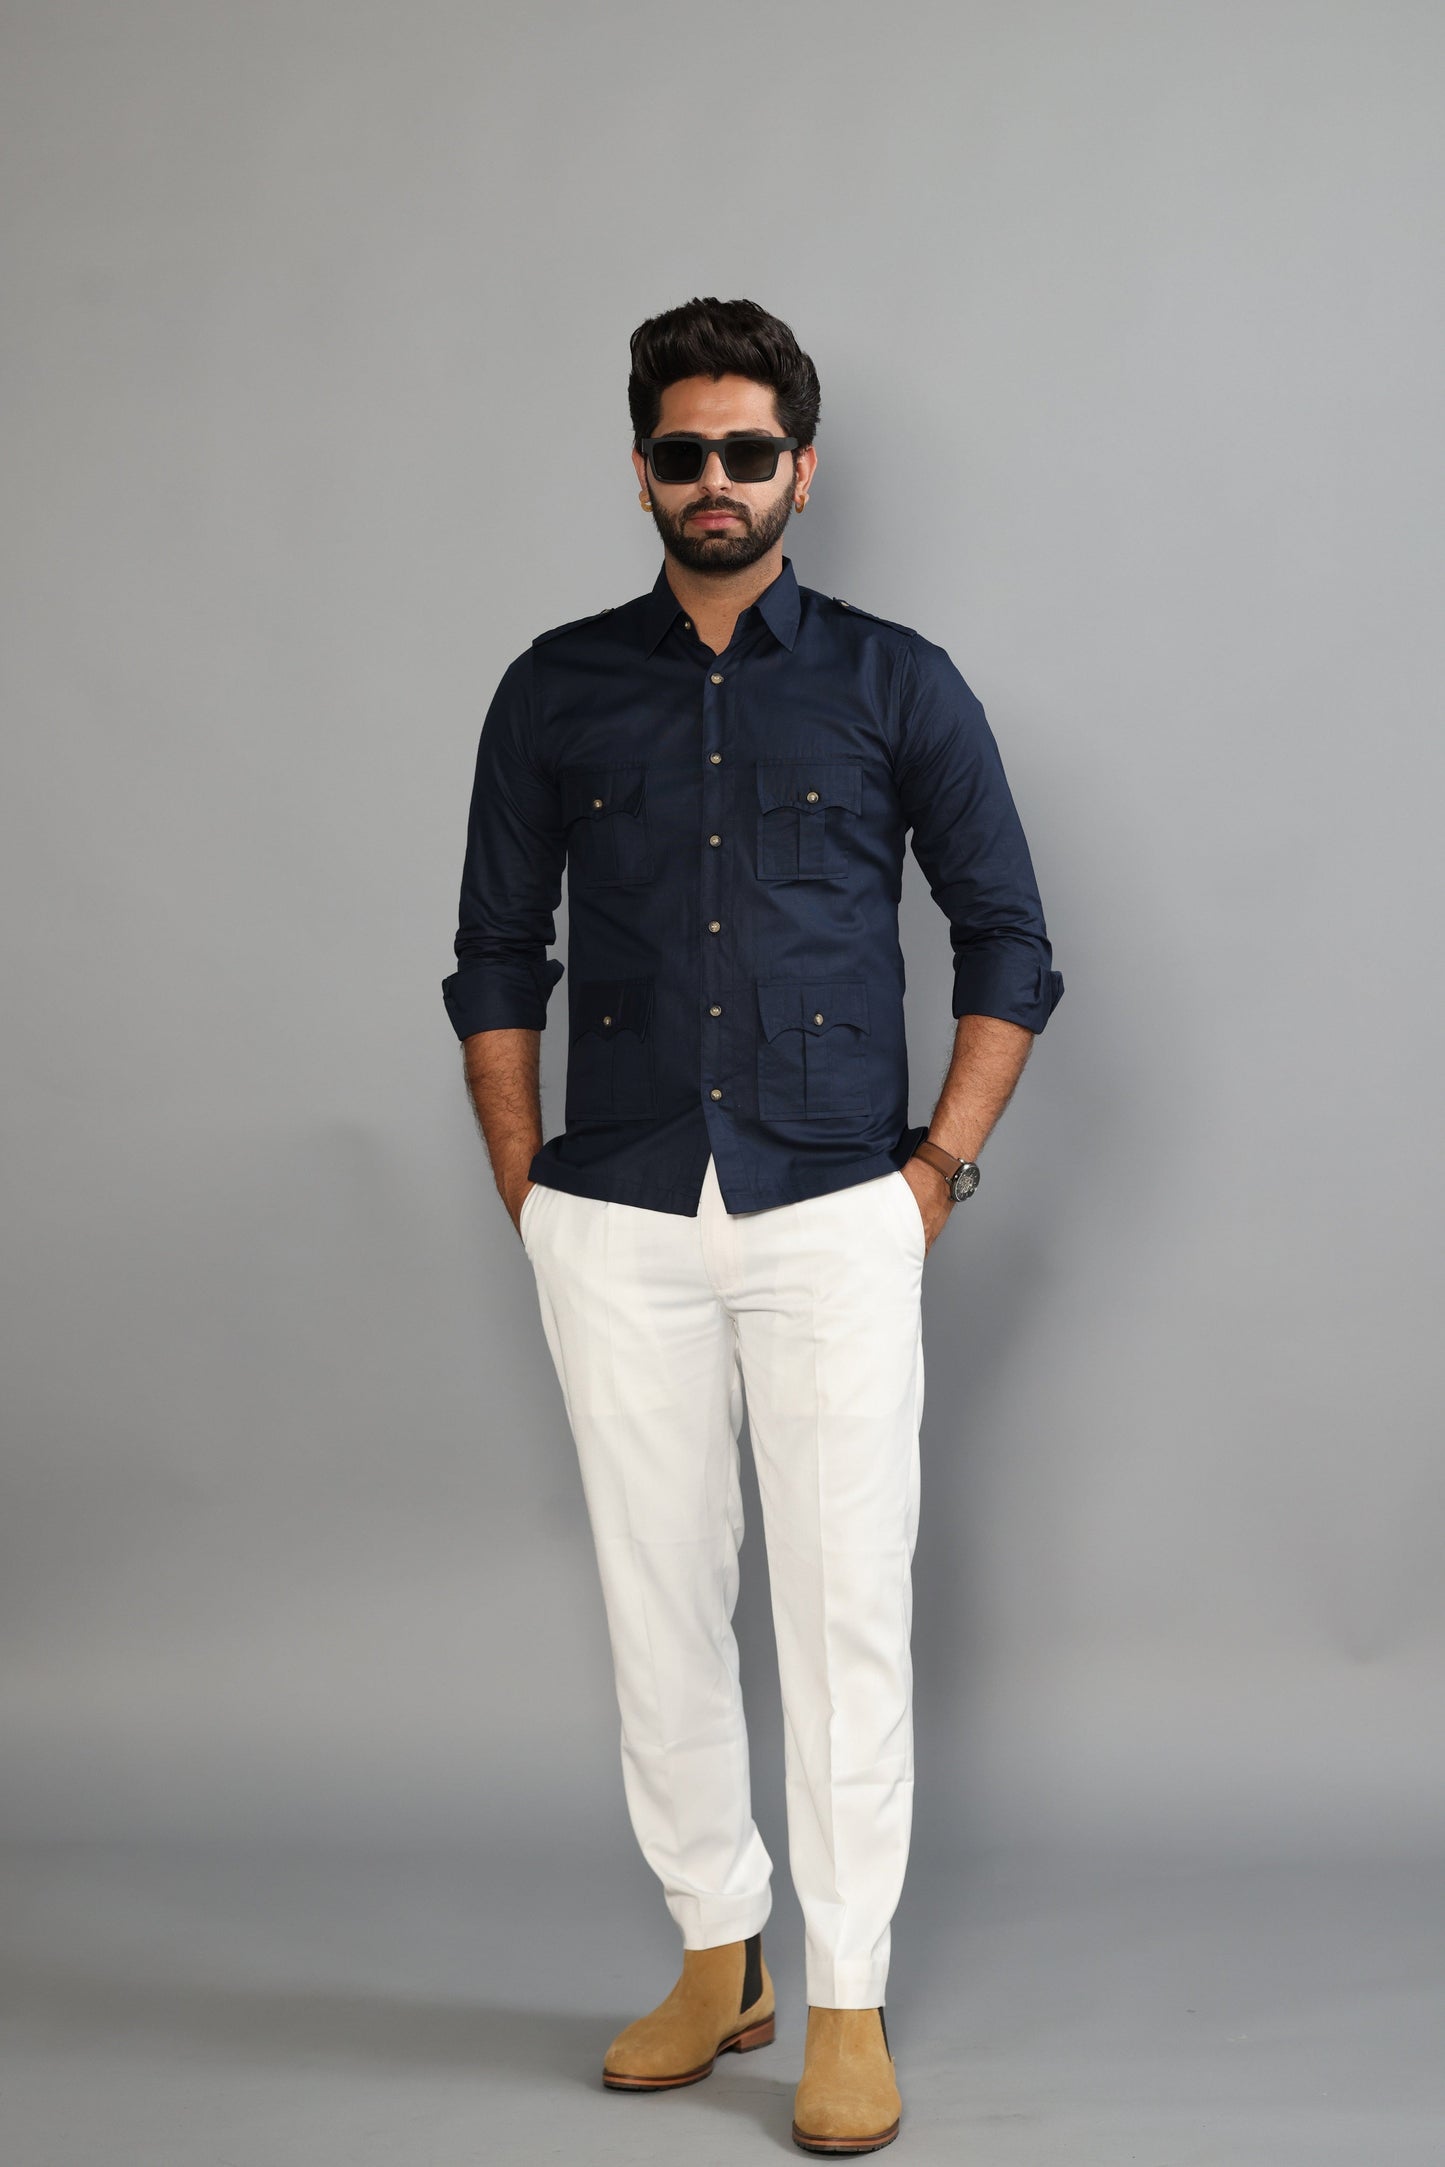 Navy Blue Color Cotton Hunting Shirt